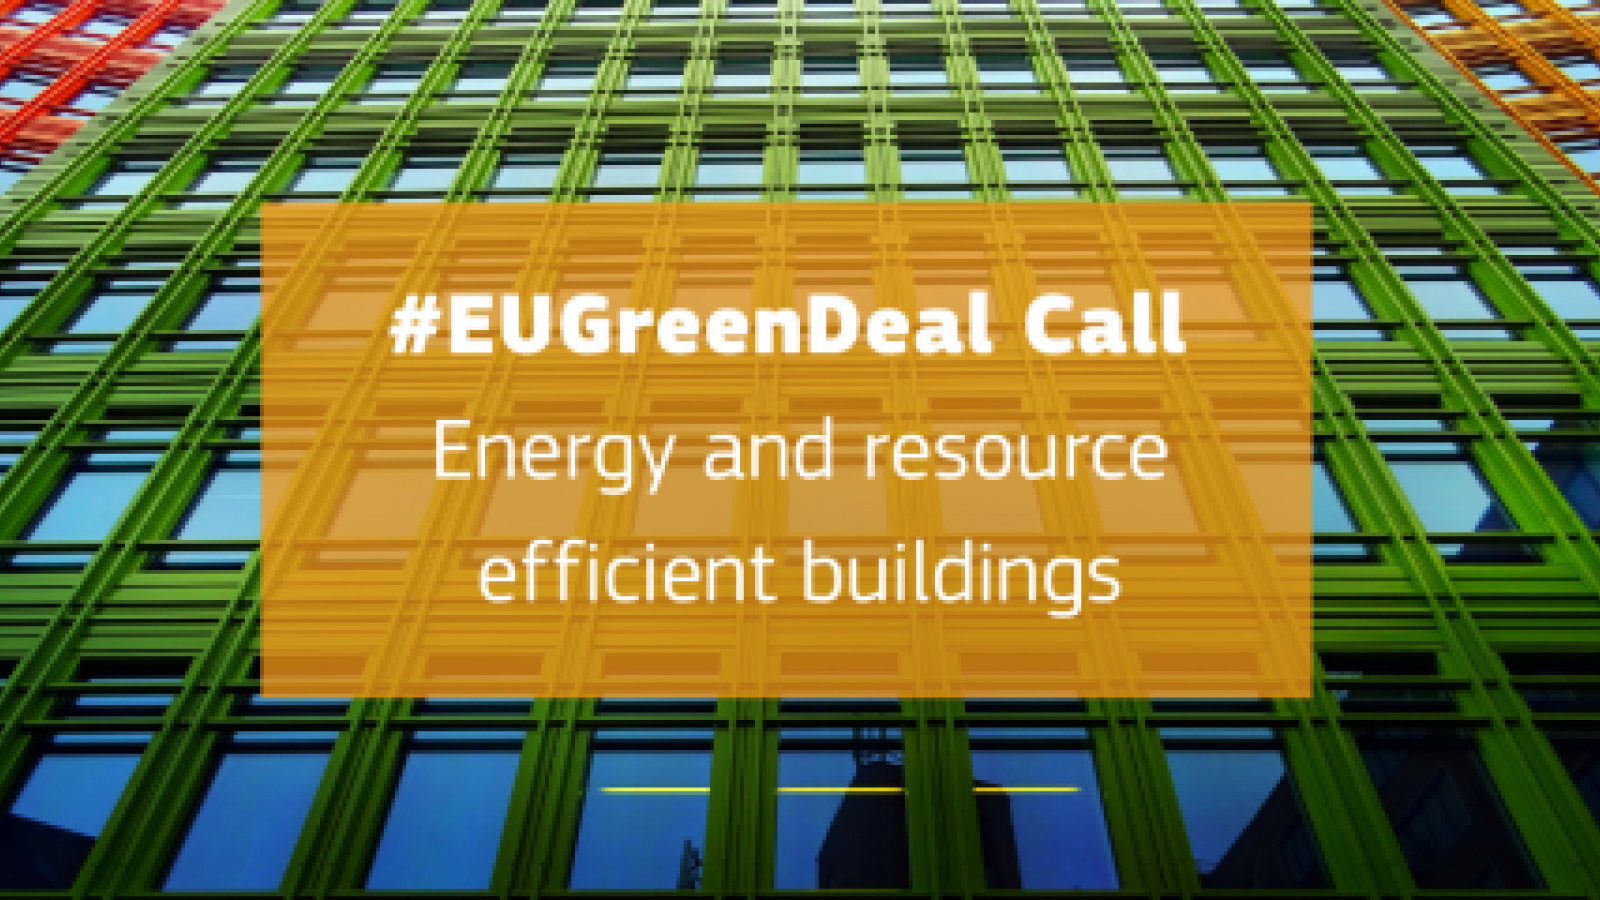 European Research and Innovation Days to discuss energy- and resource-efficient buildings 